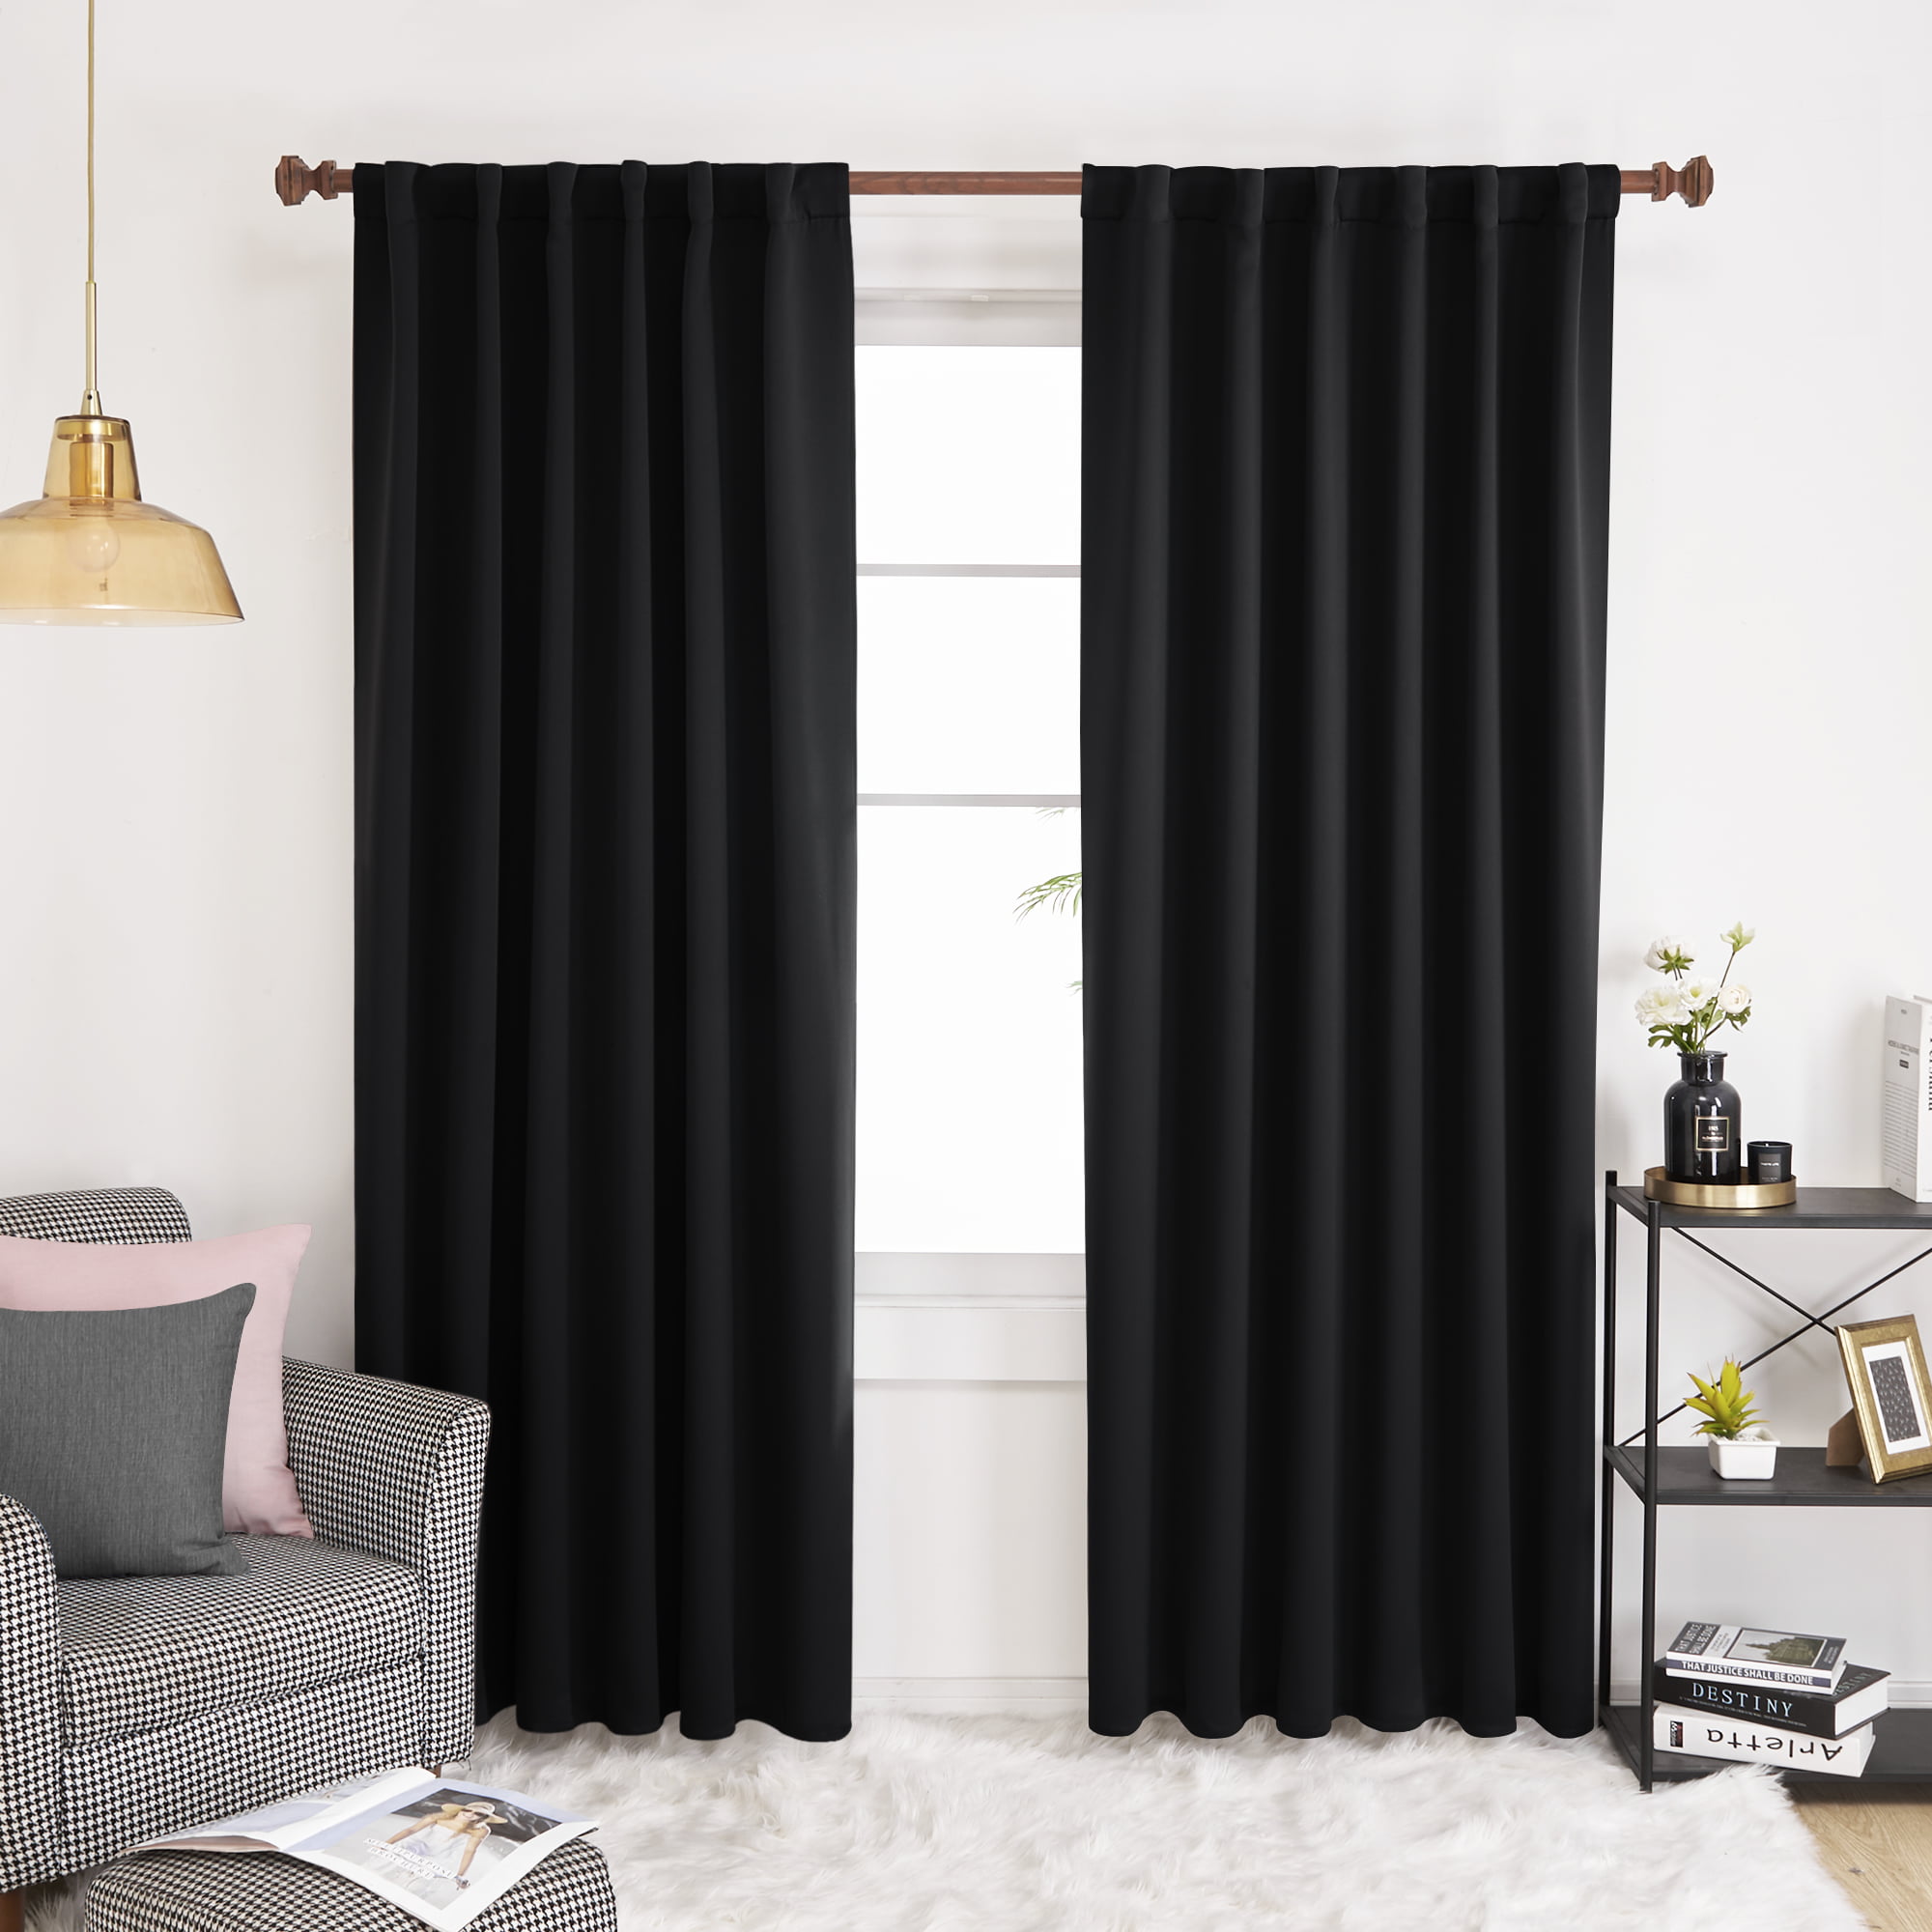 Details about   Black 84 inch Long Fire Rated/Treated Velvet Curtain Panel w/Rod Pocket Drape 